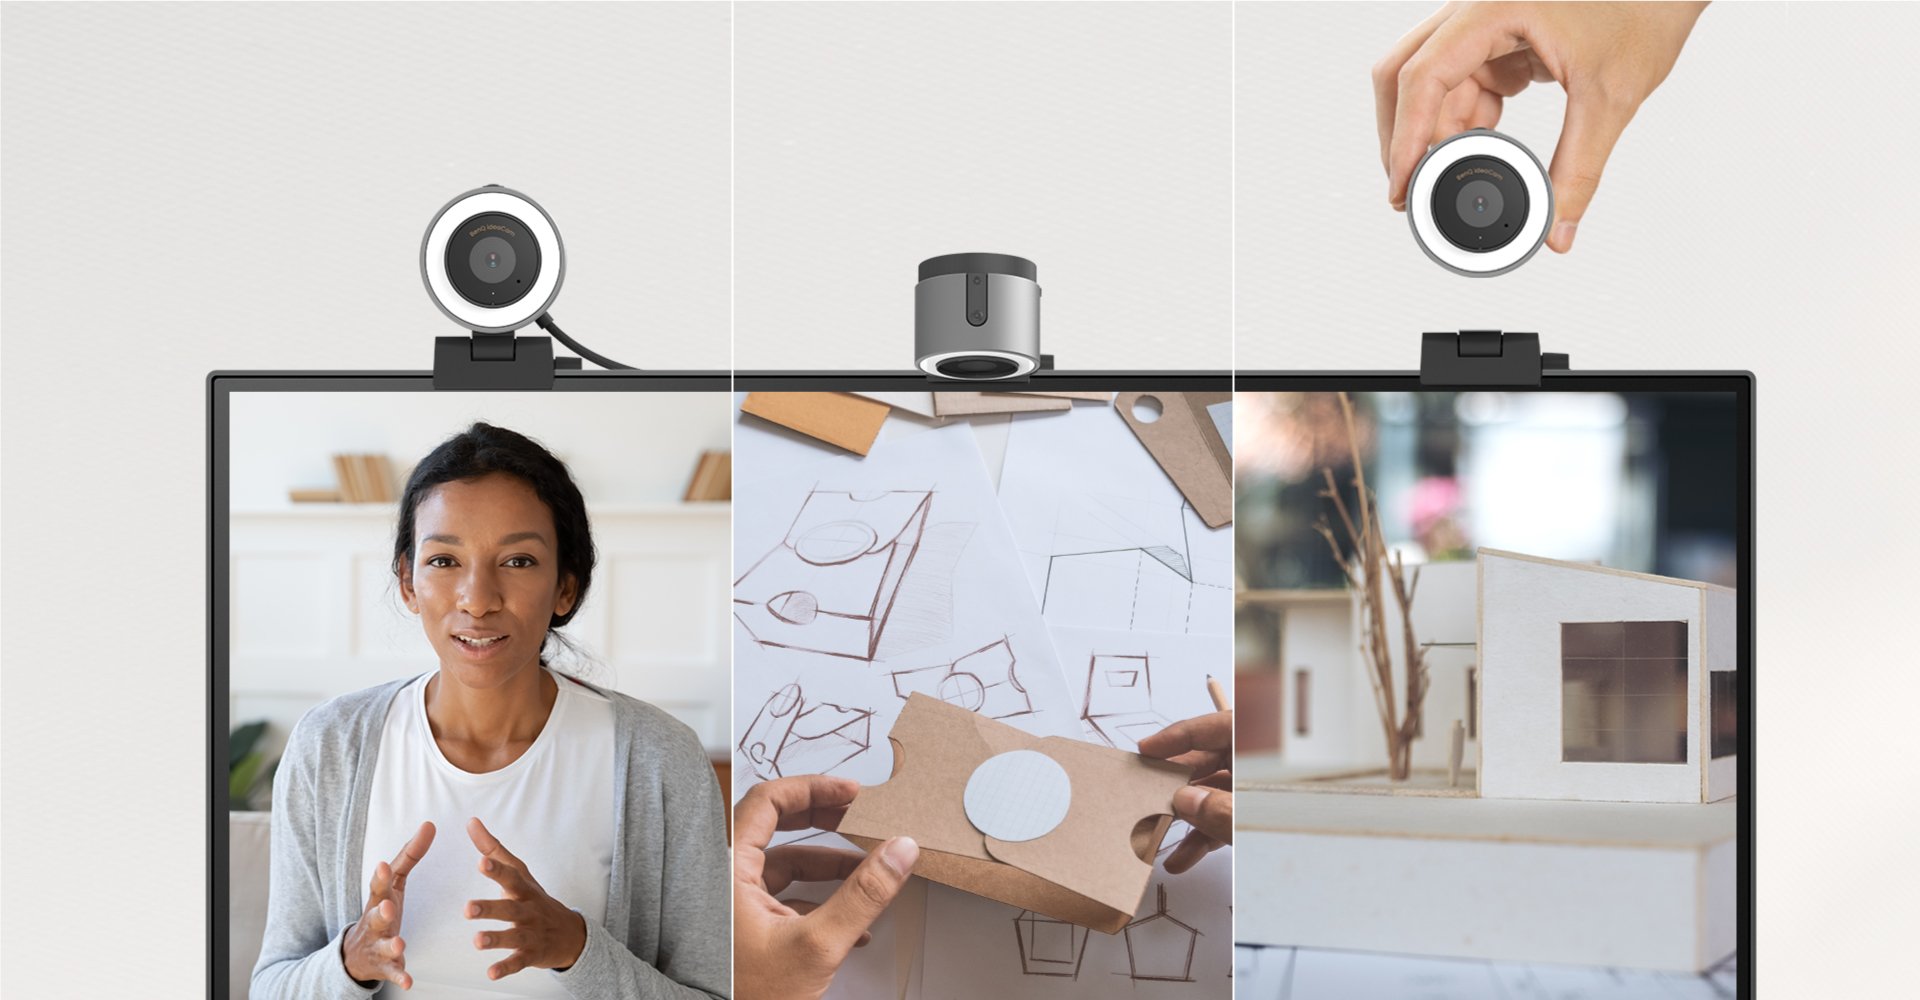 BenQ ideaCam, a versatile webcam with portrait, desk view, and handheld modes, reaches its full potential when paired with EnSpire.